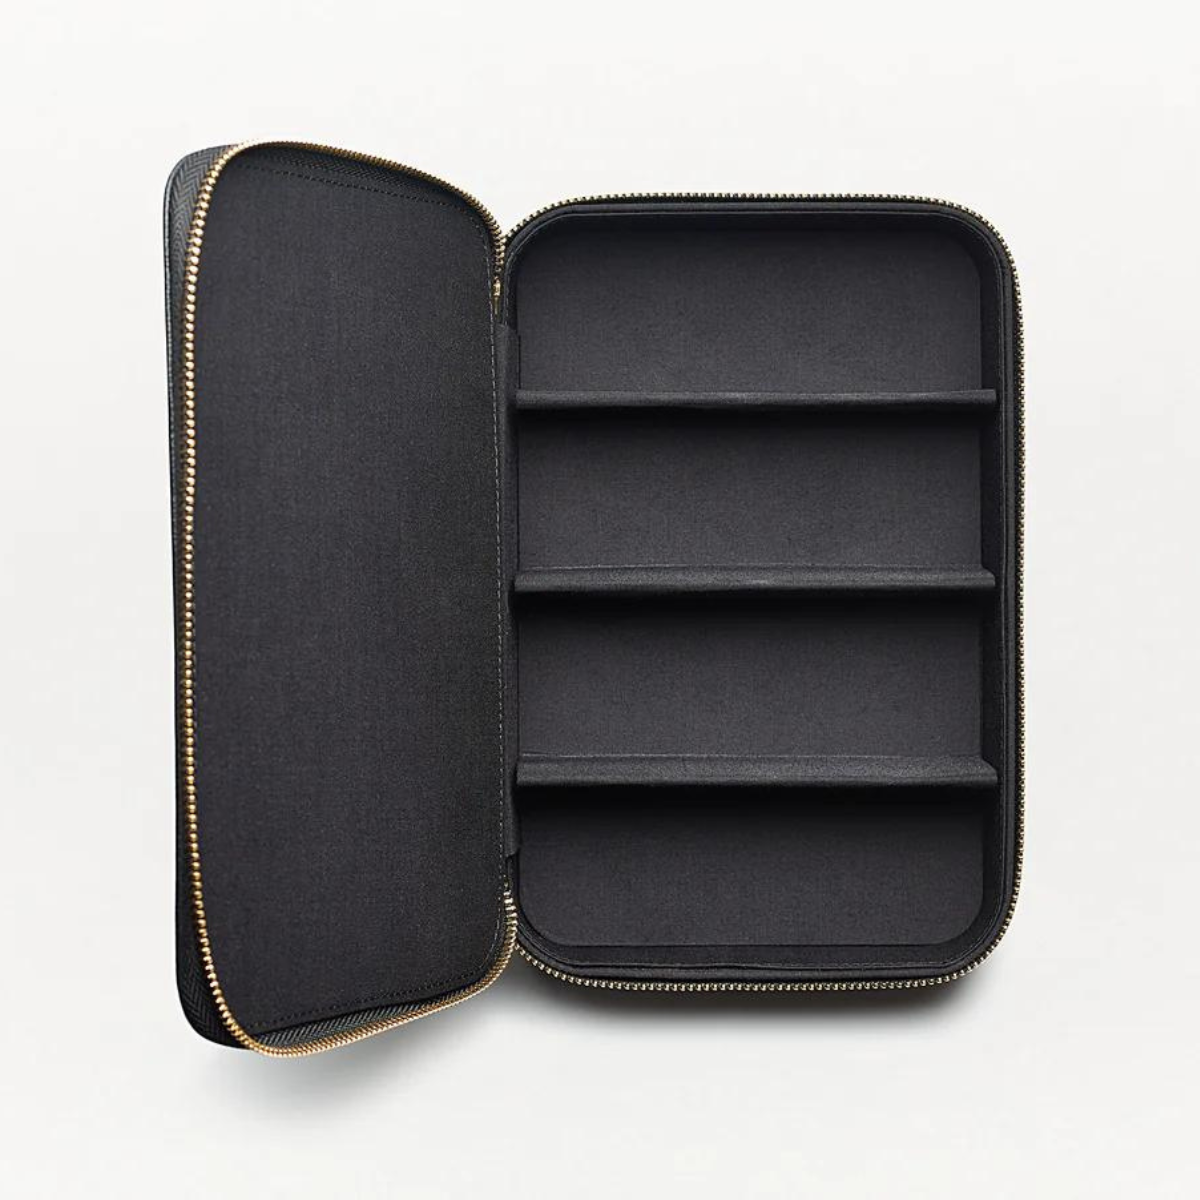 Moscot Travel Case